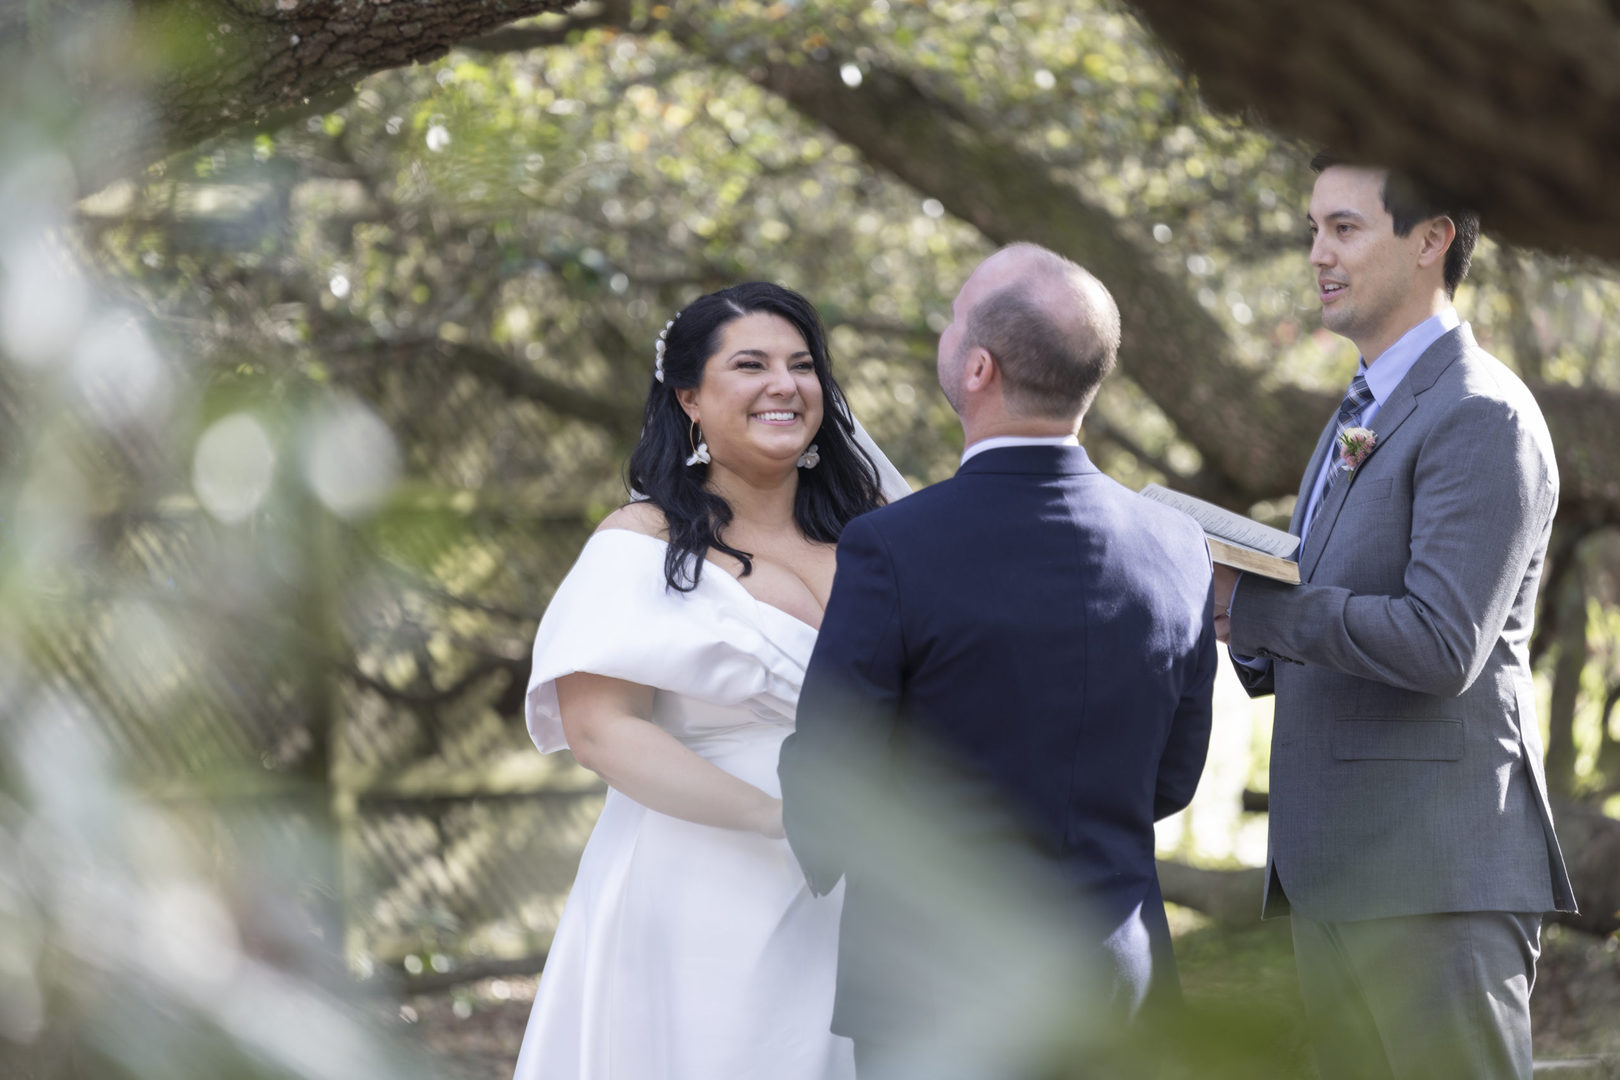 The bride and groom laugh during their wedding ceremony at Vintage Court in Covington LA